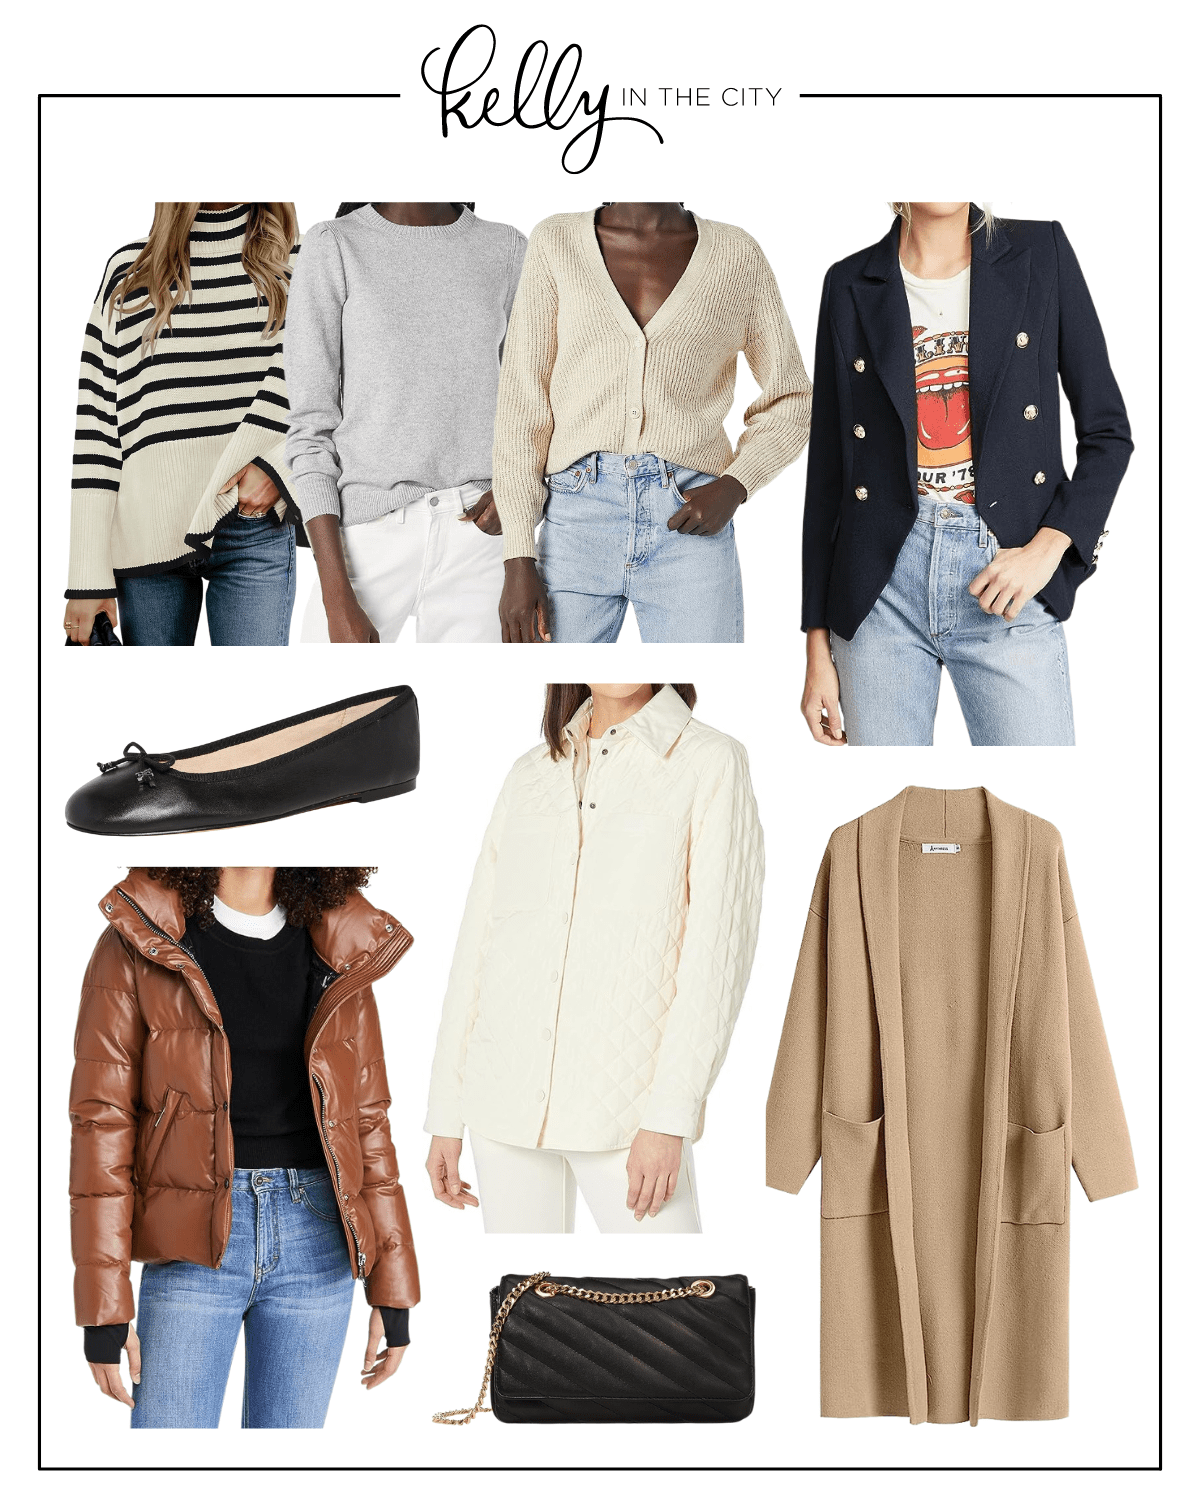 A few of my favorite Amazon Fall Fashion Finds. From left to right, a striped turtleneck sweater, a grey sweater, a cream cardigan sweater, a navy blazer, black ballet flats, a leather puffer jacket, a white quilted shacket, a tan long cardigan sweater, and a black quilted leather crossbody bag.